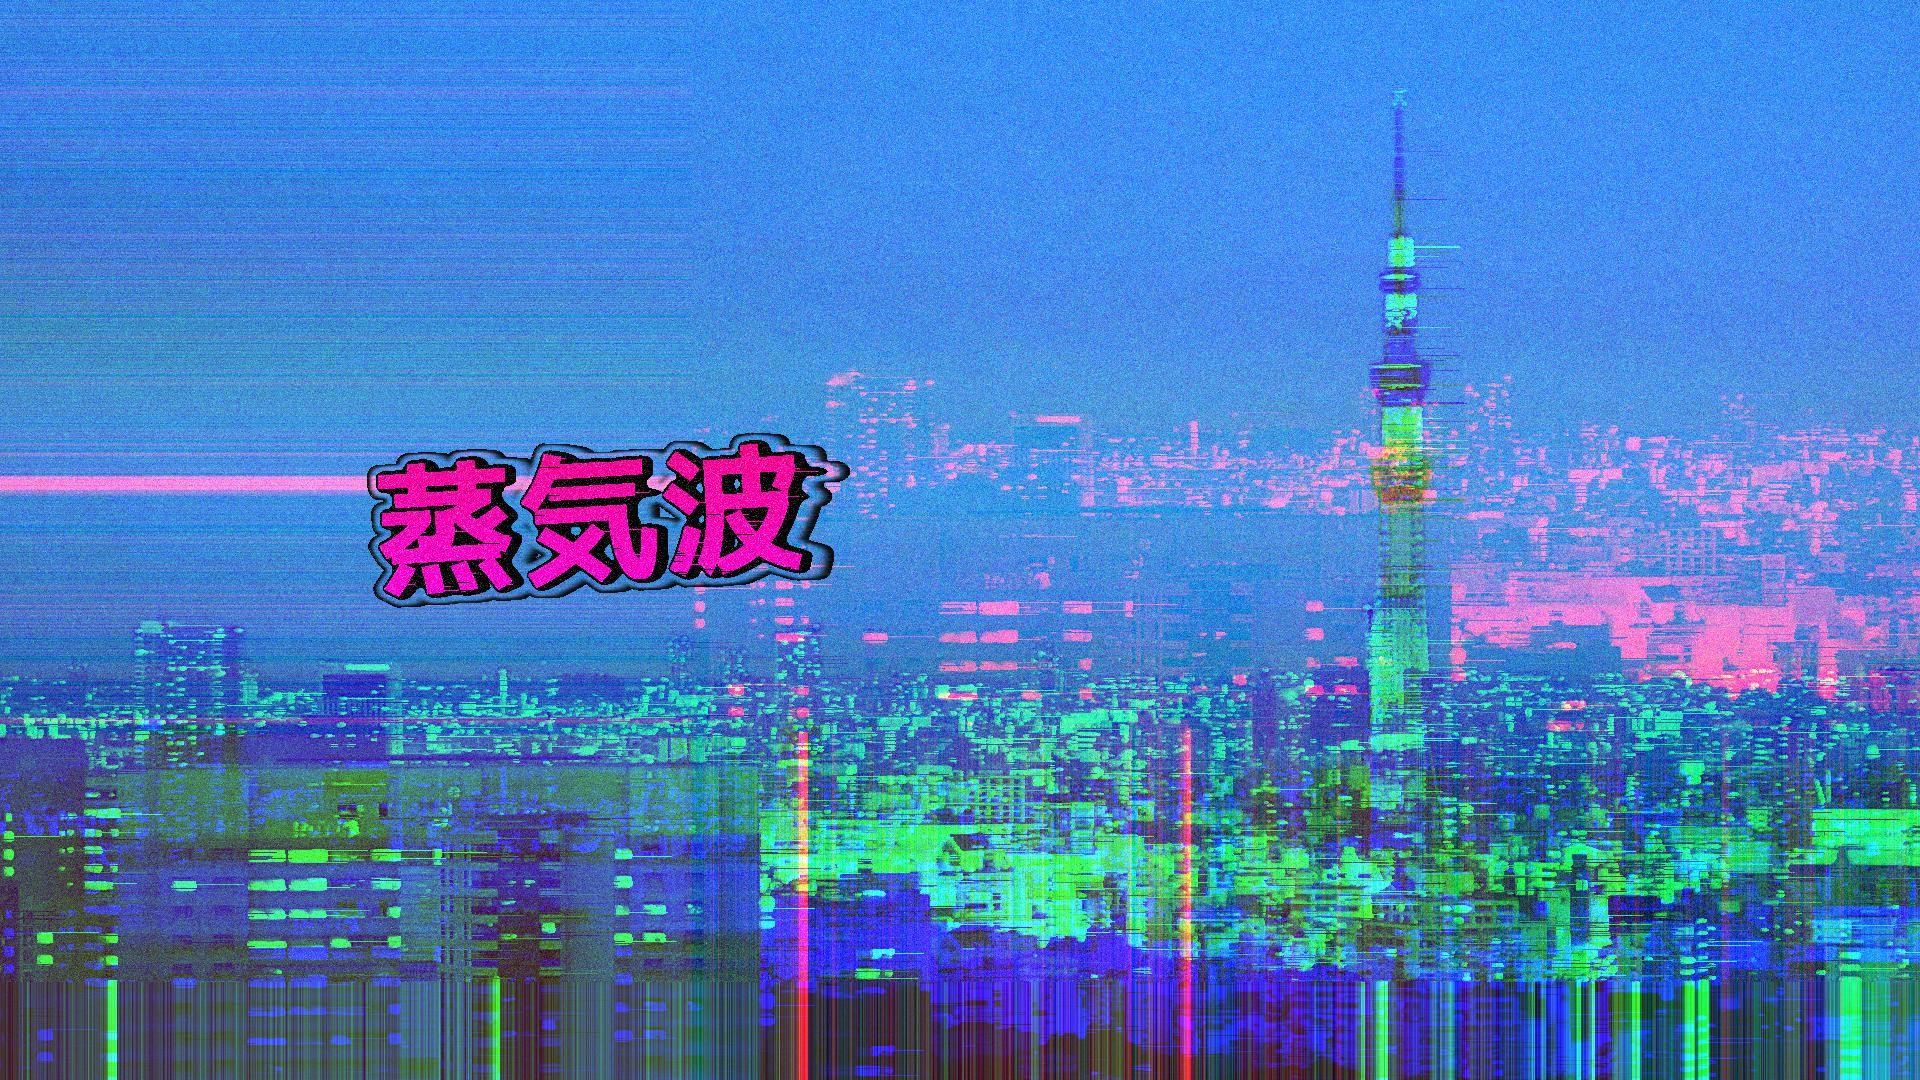 Vaporwave wallpaper 1920x1080 ·① Download free awesome full HD